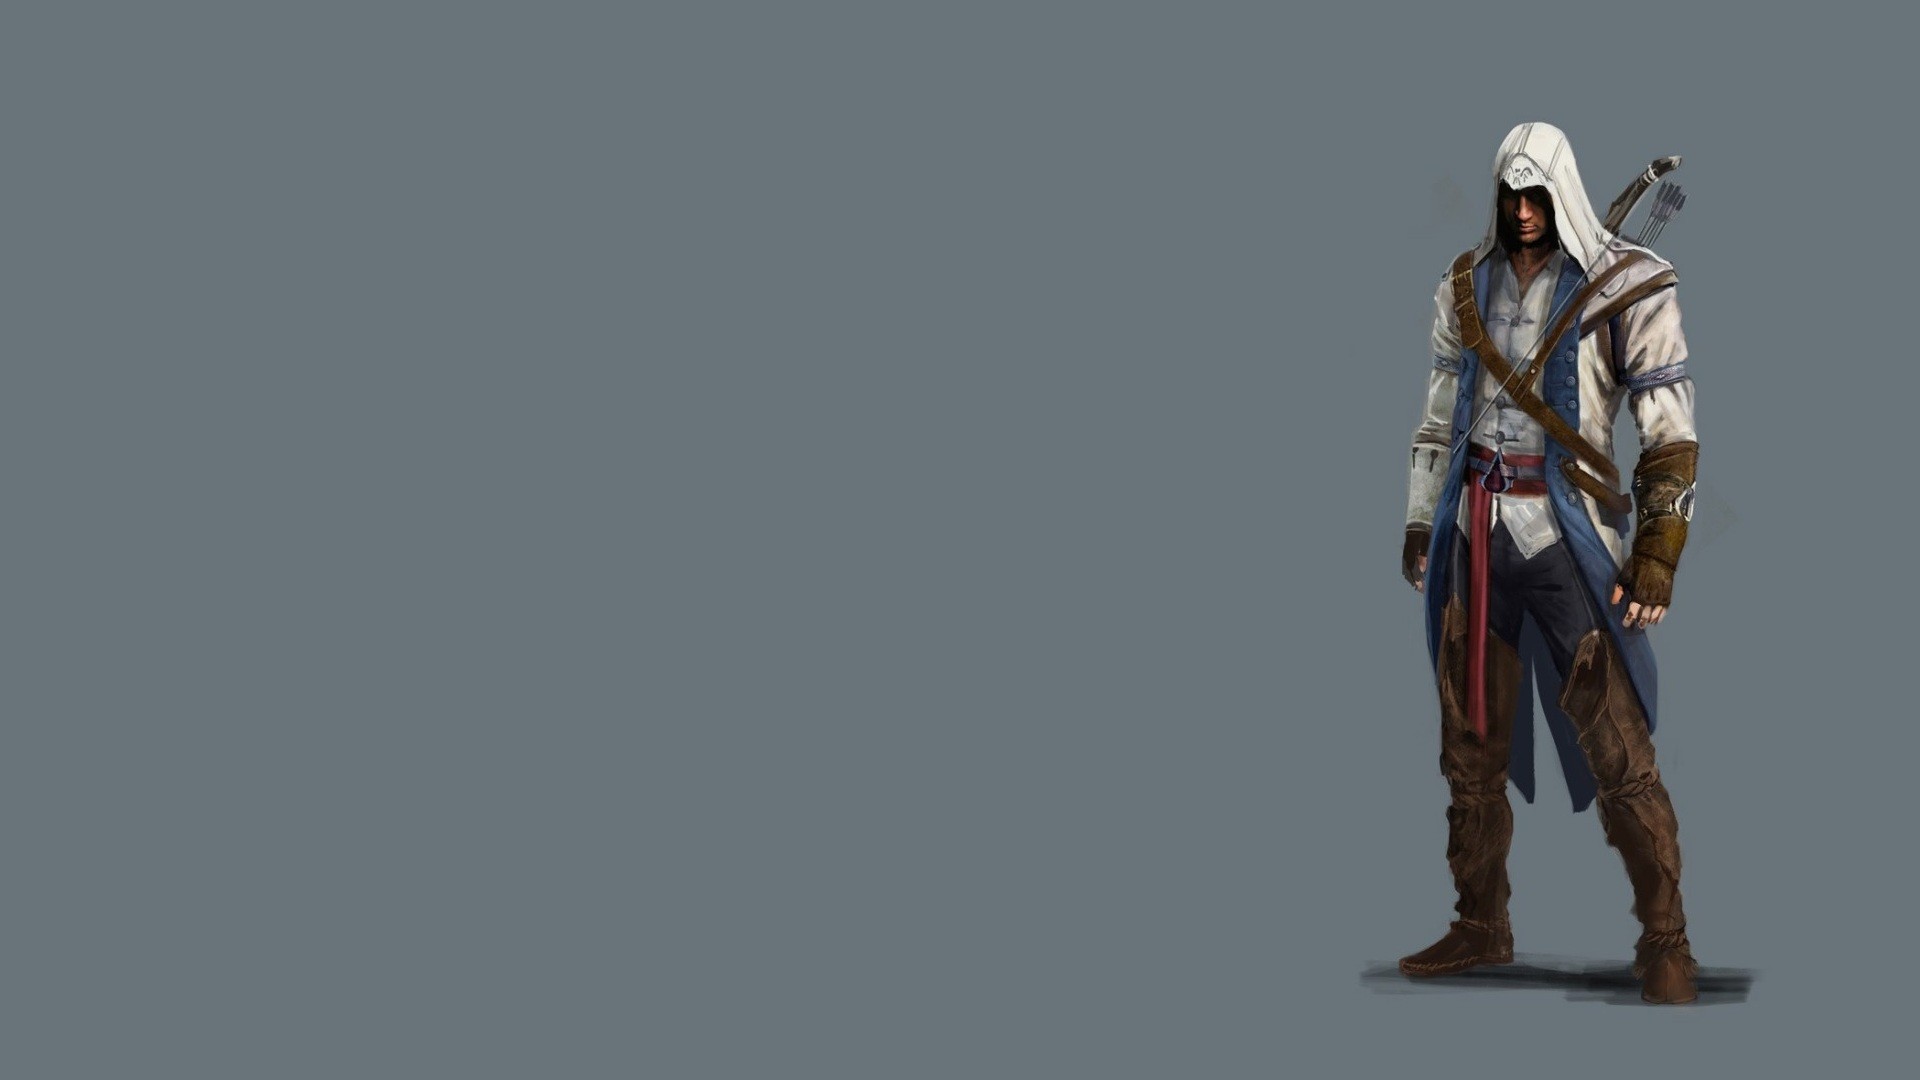 General 1920x1080 Assassin's Creed III Assassin's Creed video games video game characters Connor Kenway Ubisoft